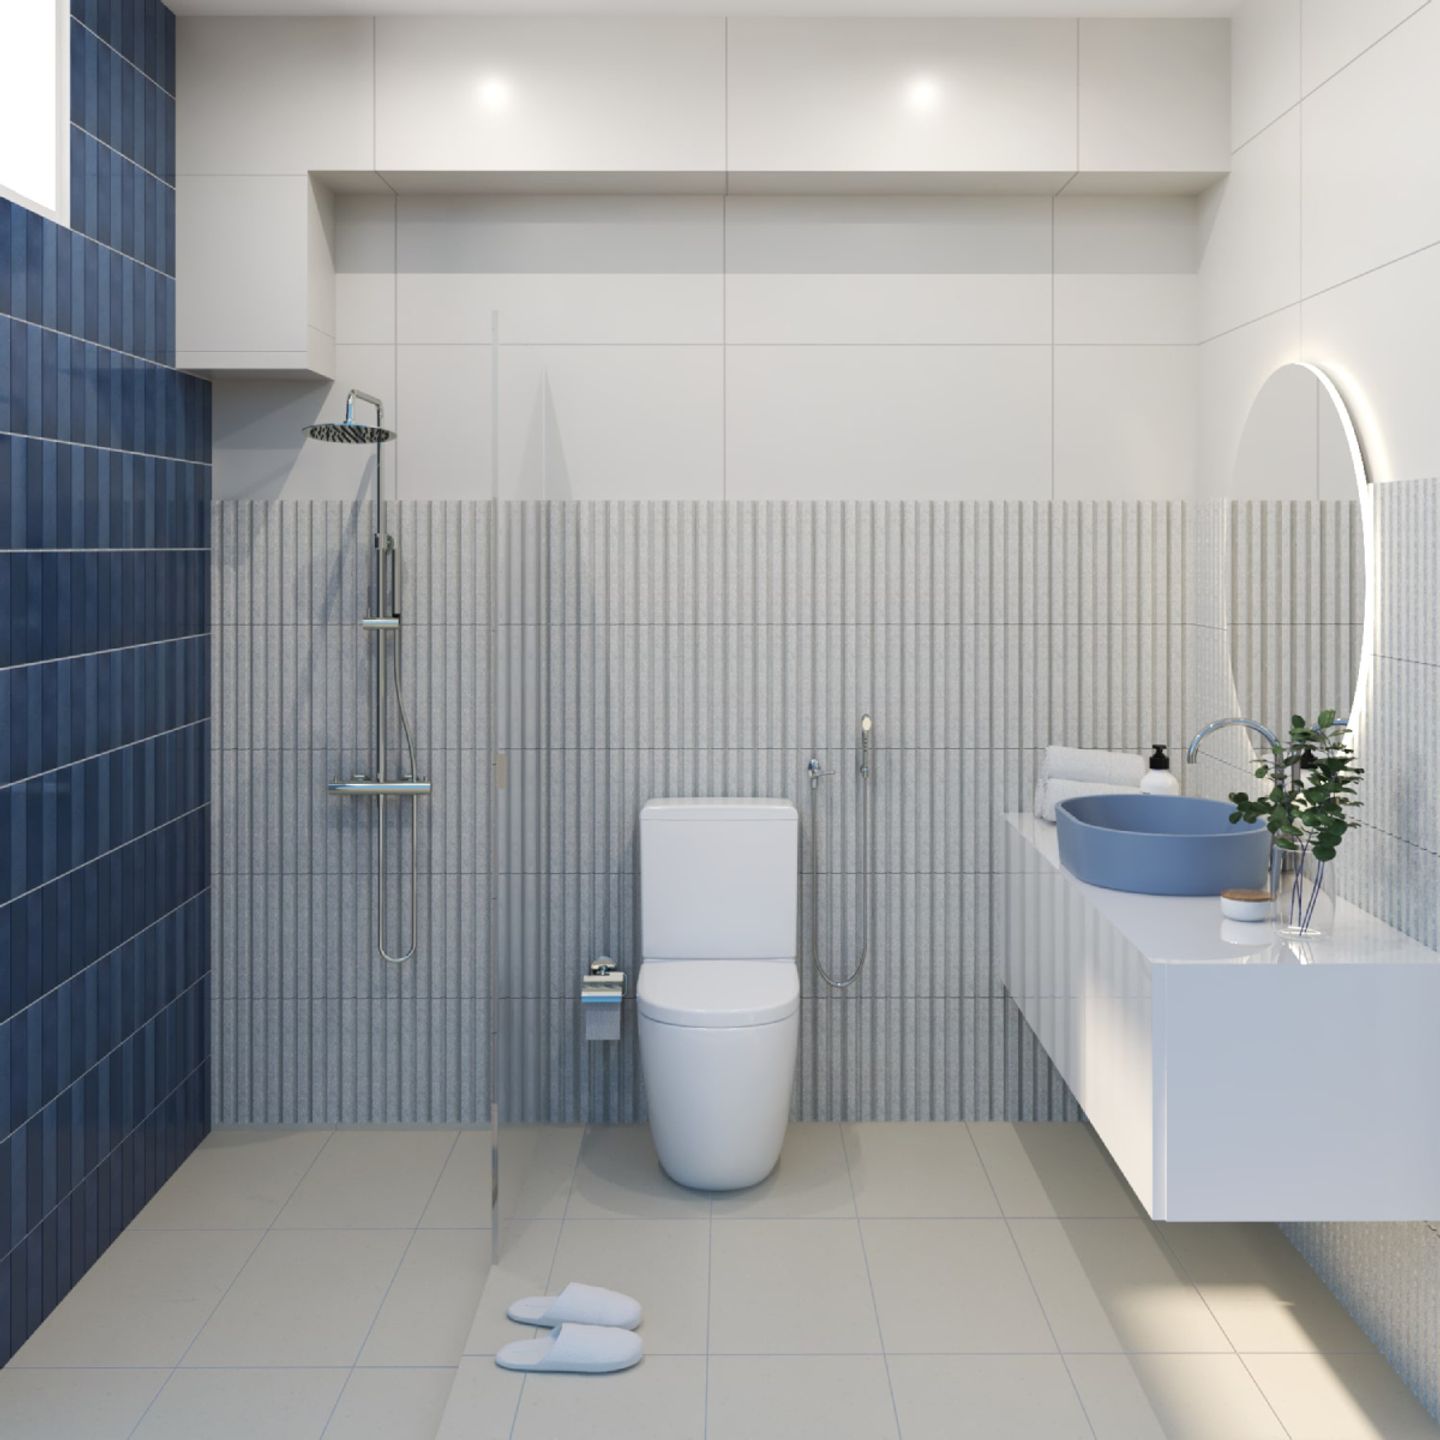 Bathroom Design With White And Blue Textured Wall Tiles And A Glass Partition - Livspace